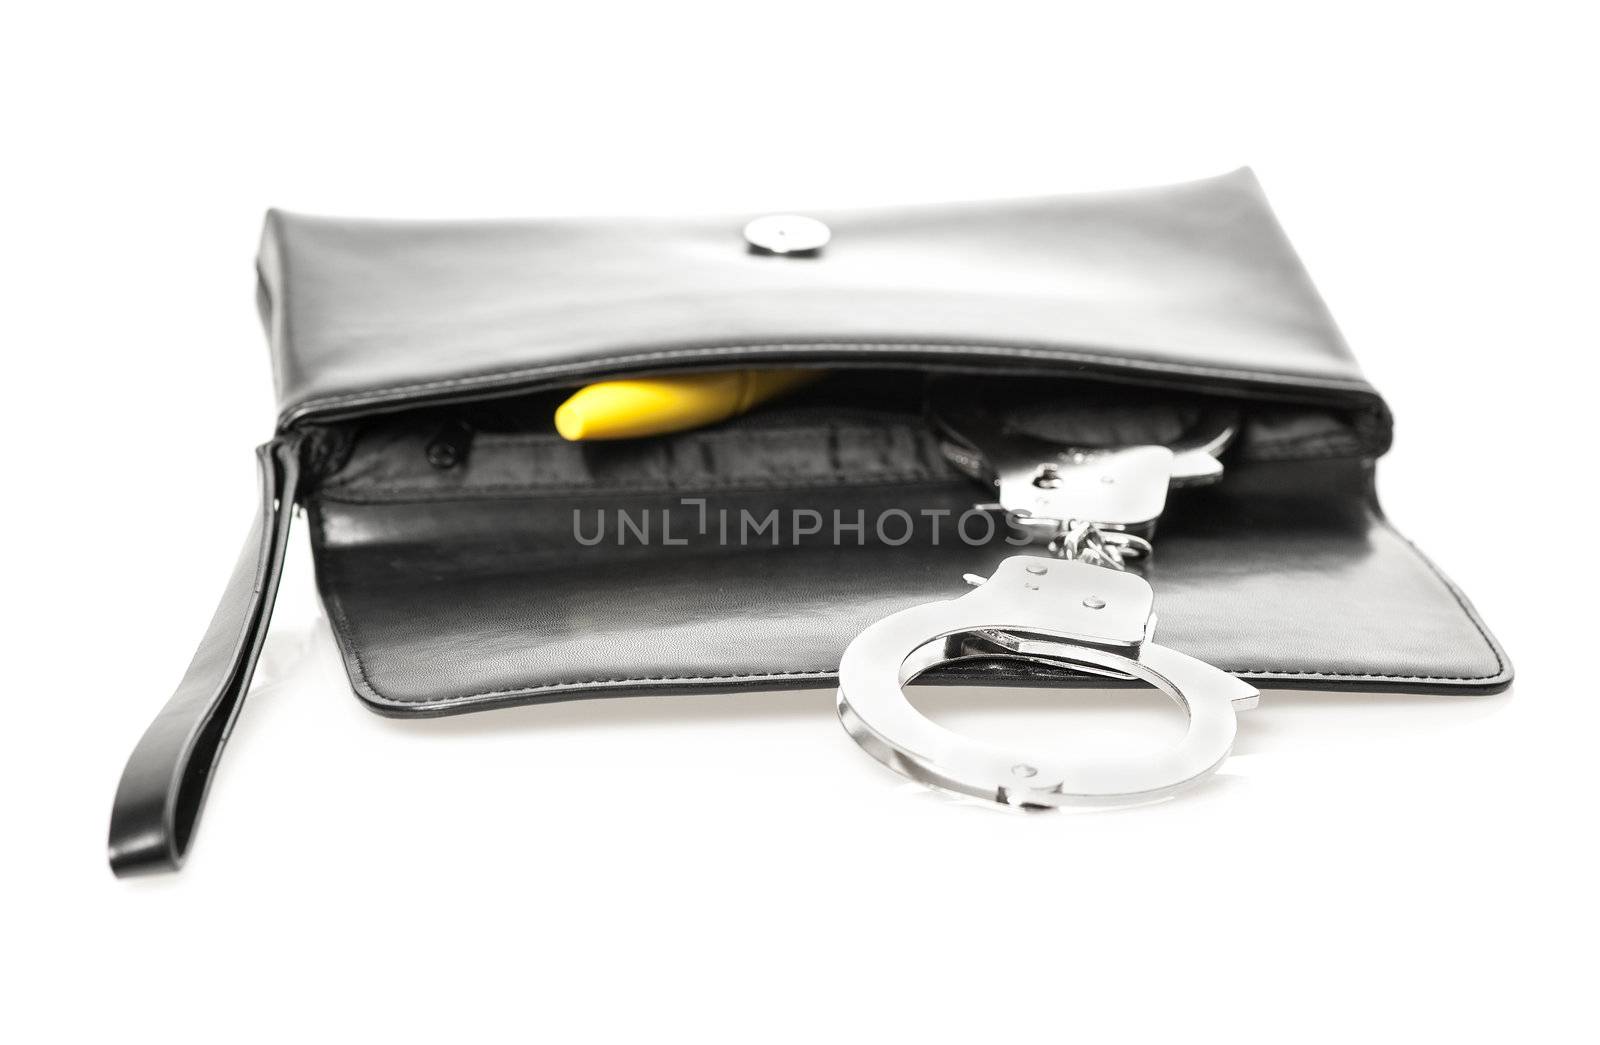 An open black clutch bag/purse with handcuffs and a yellow dildo.